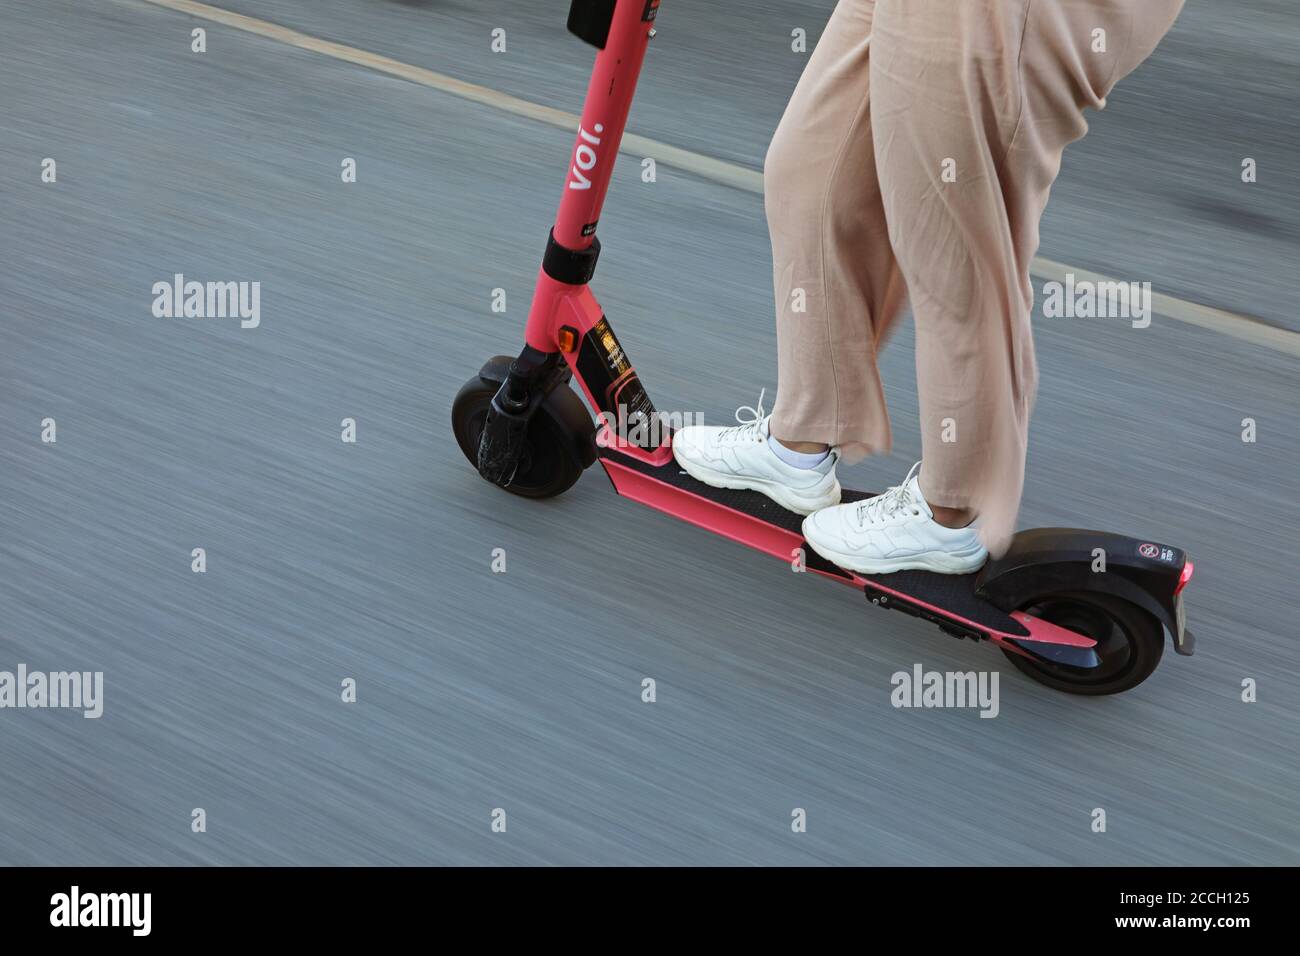 Voi scooters stock and images Page 4 - Alamy